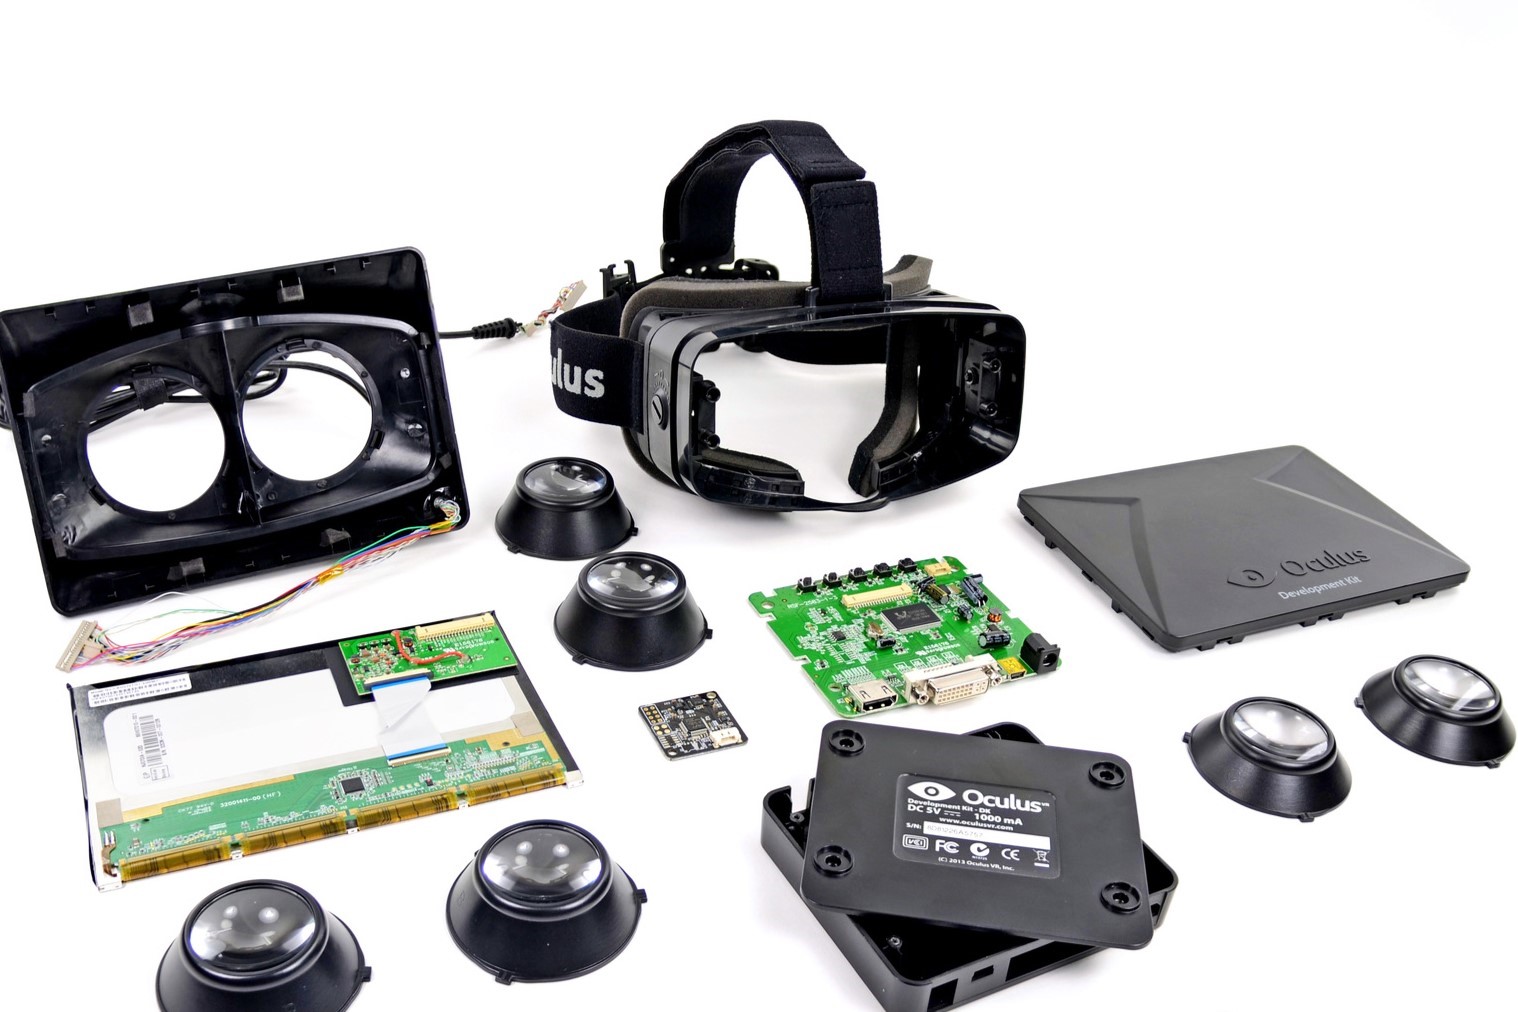 Where Can I Find Oculus Rift Parts